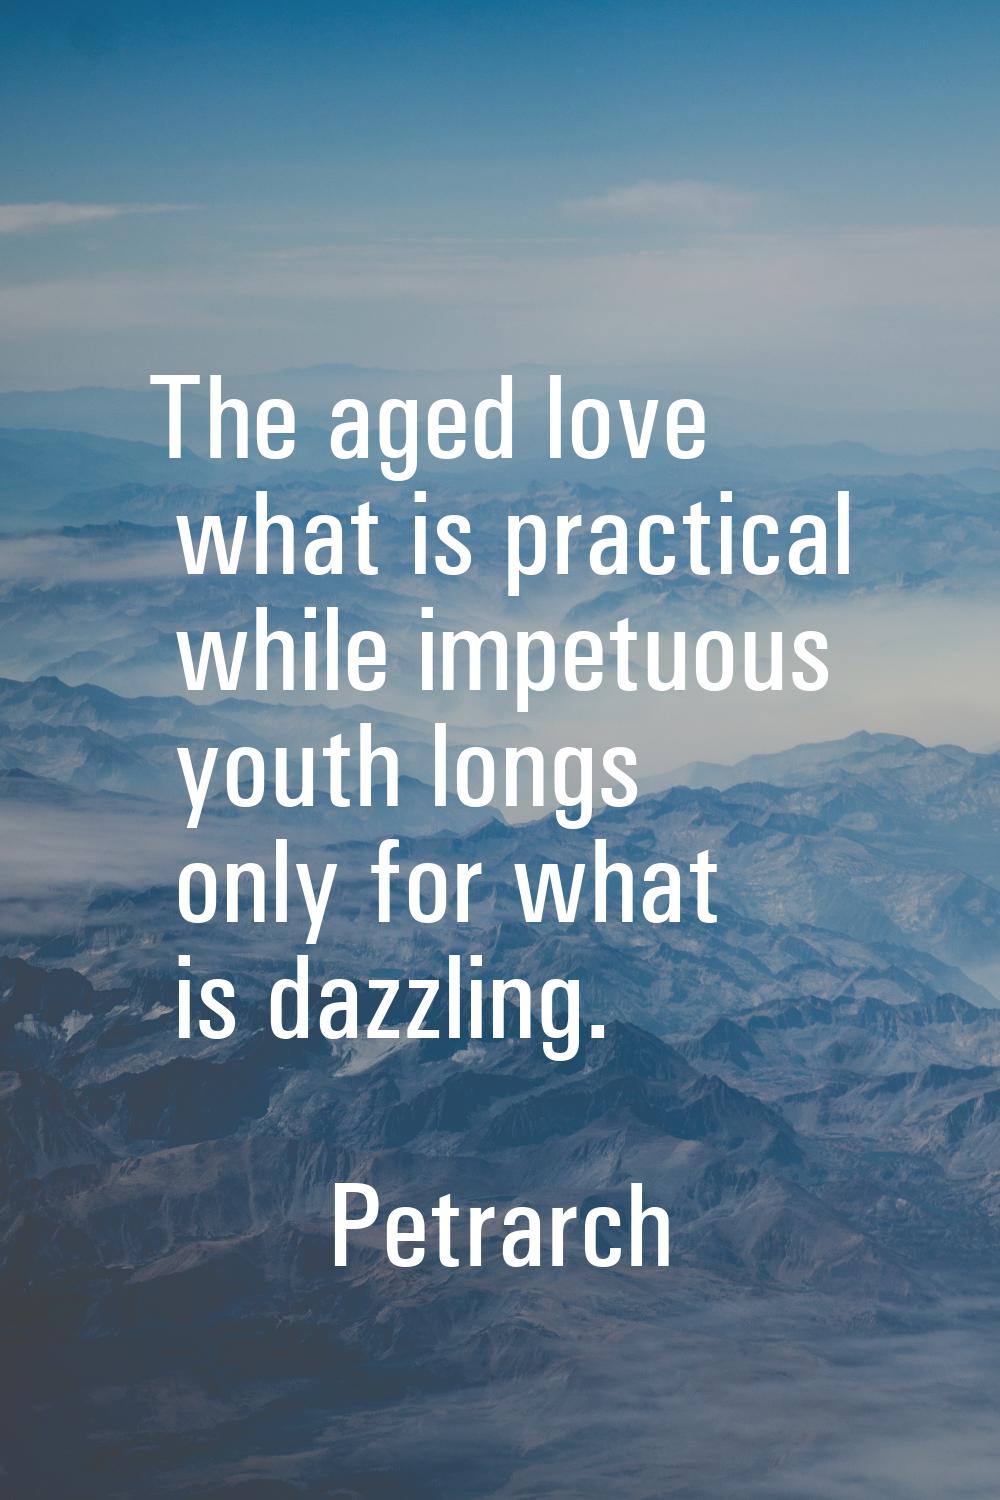 The aged love what is practical while impetuous youth longs only for what is dazzling.